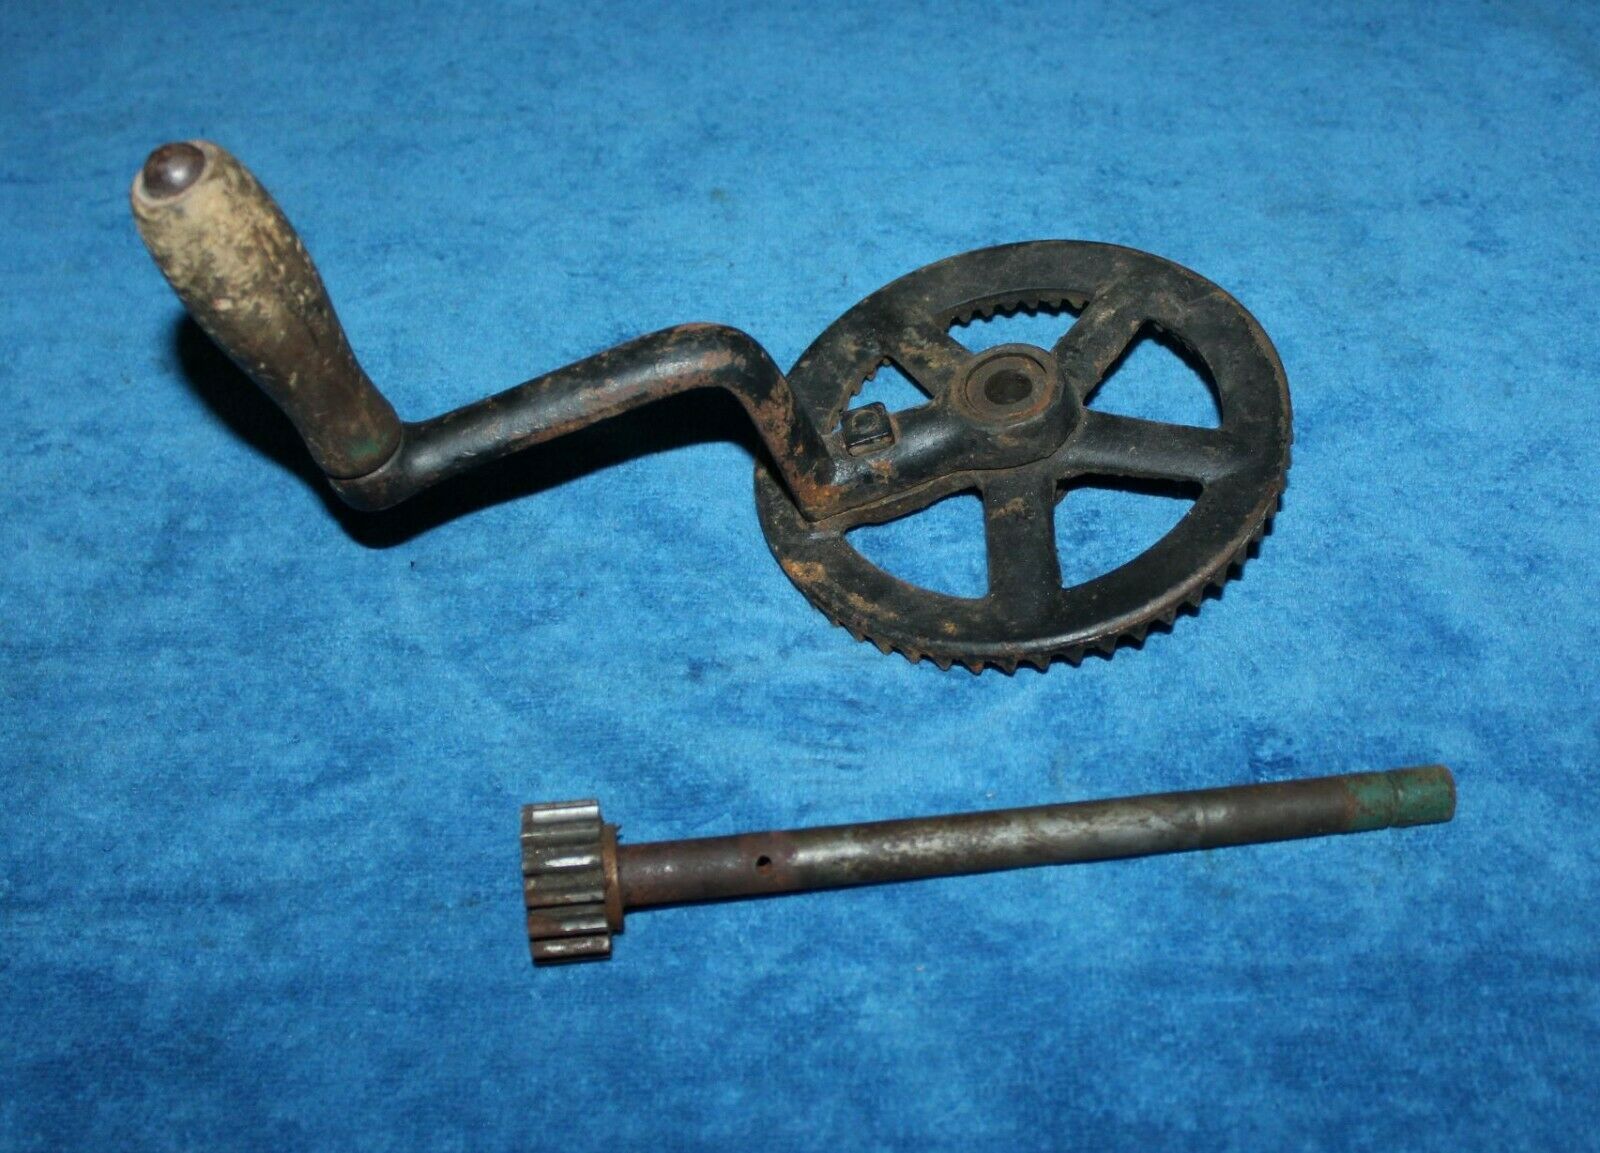 Steampunk Industrial - Farm - Gear With Wood Handle And Sprocket With Shaft